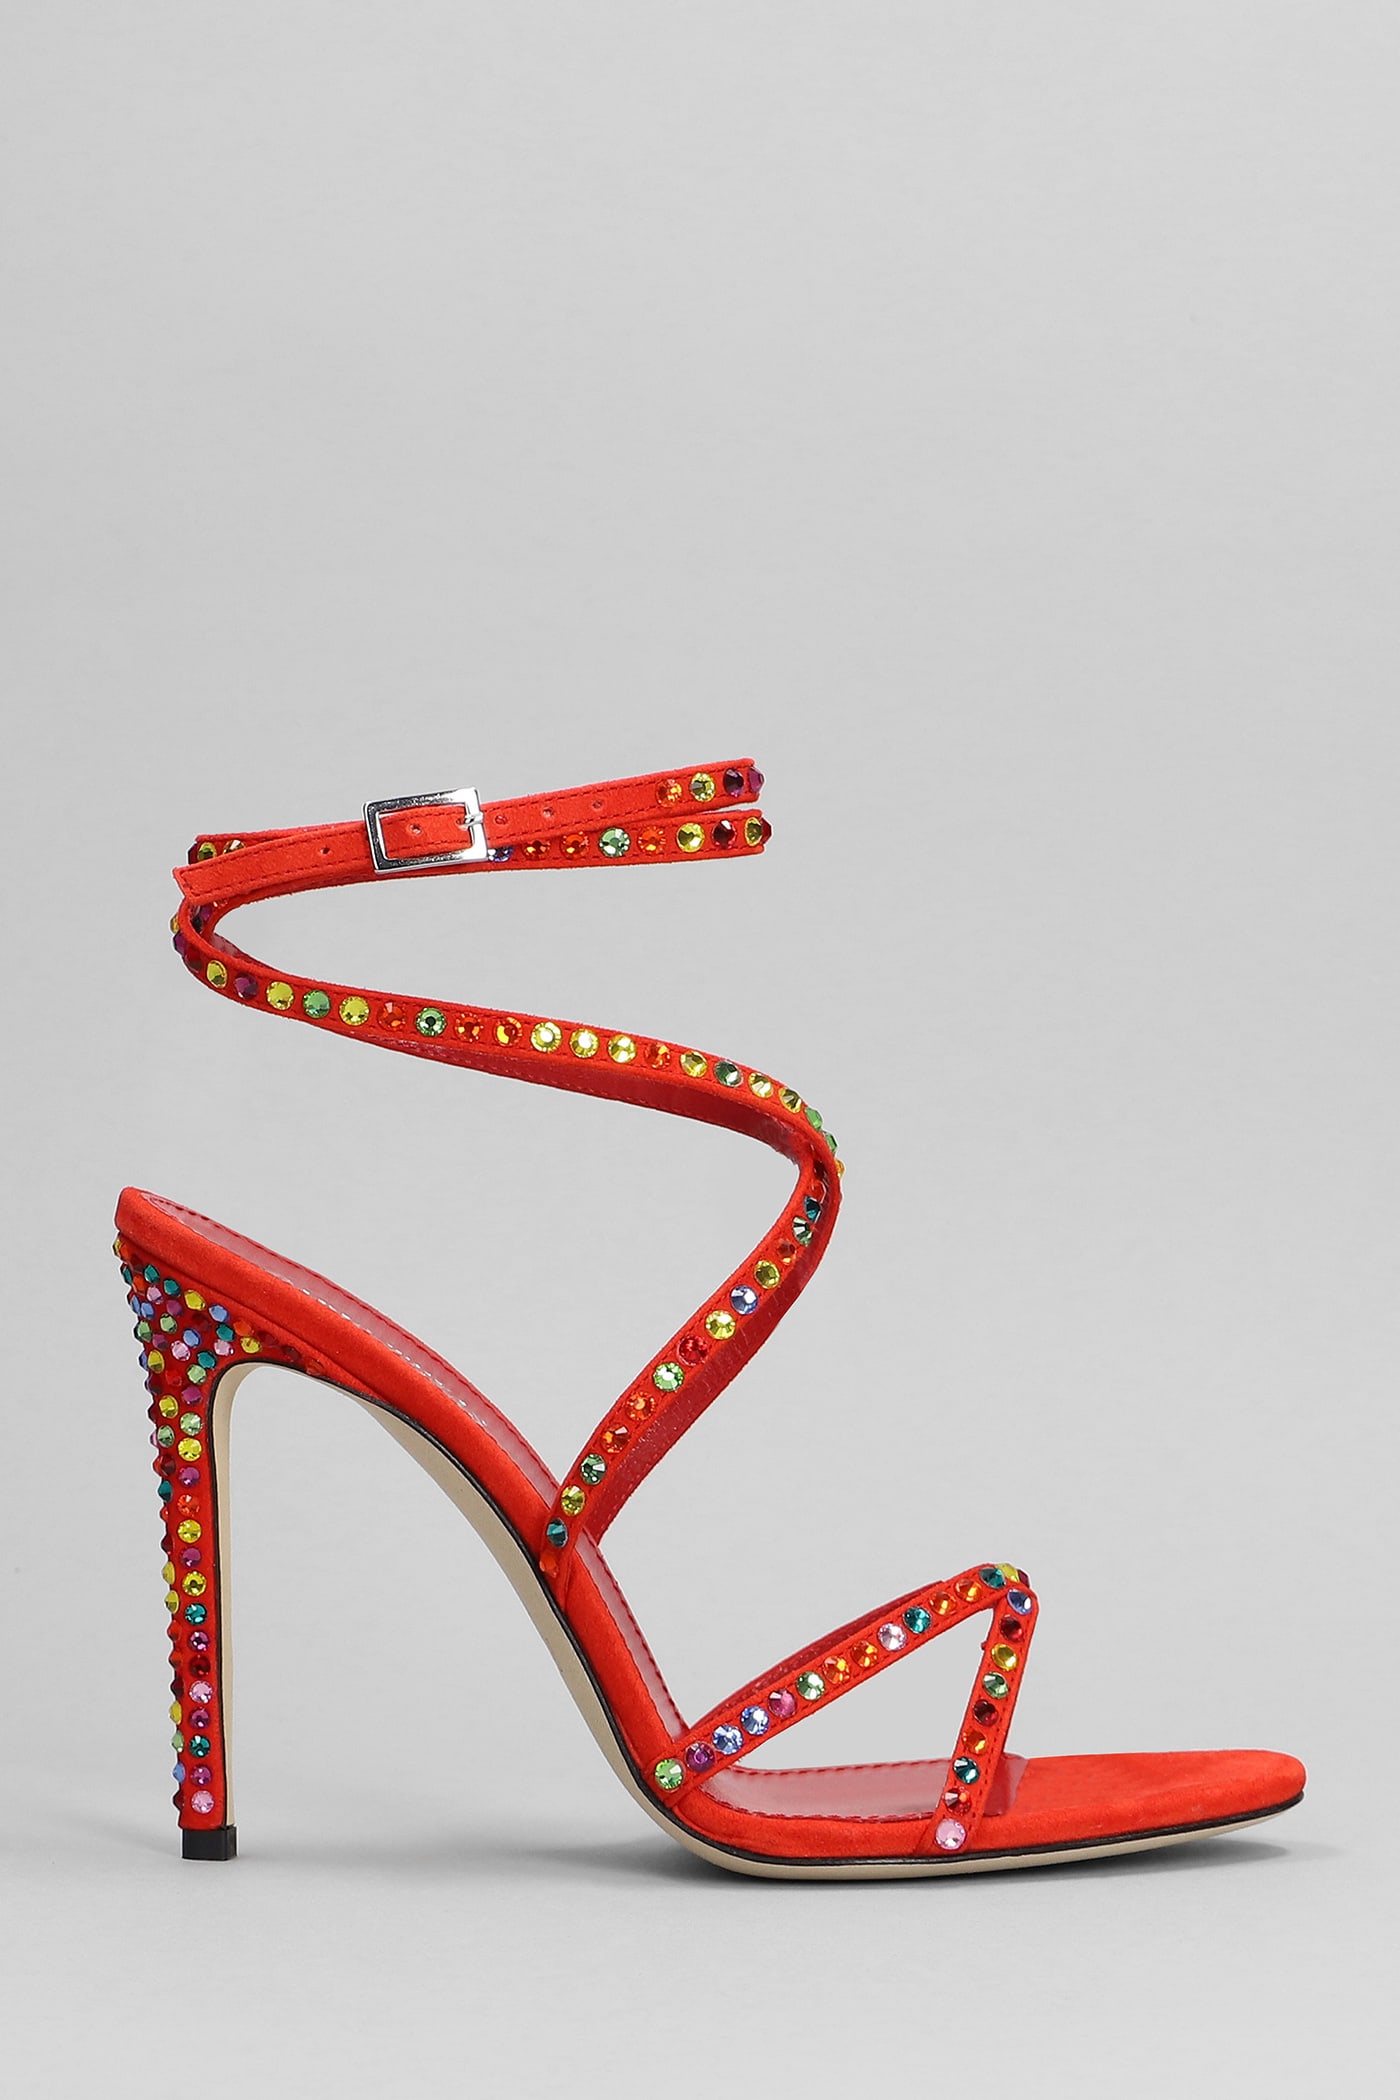 PARIS TEXAS HOLLY ZOE SANDALS IN RED SUEDE